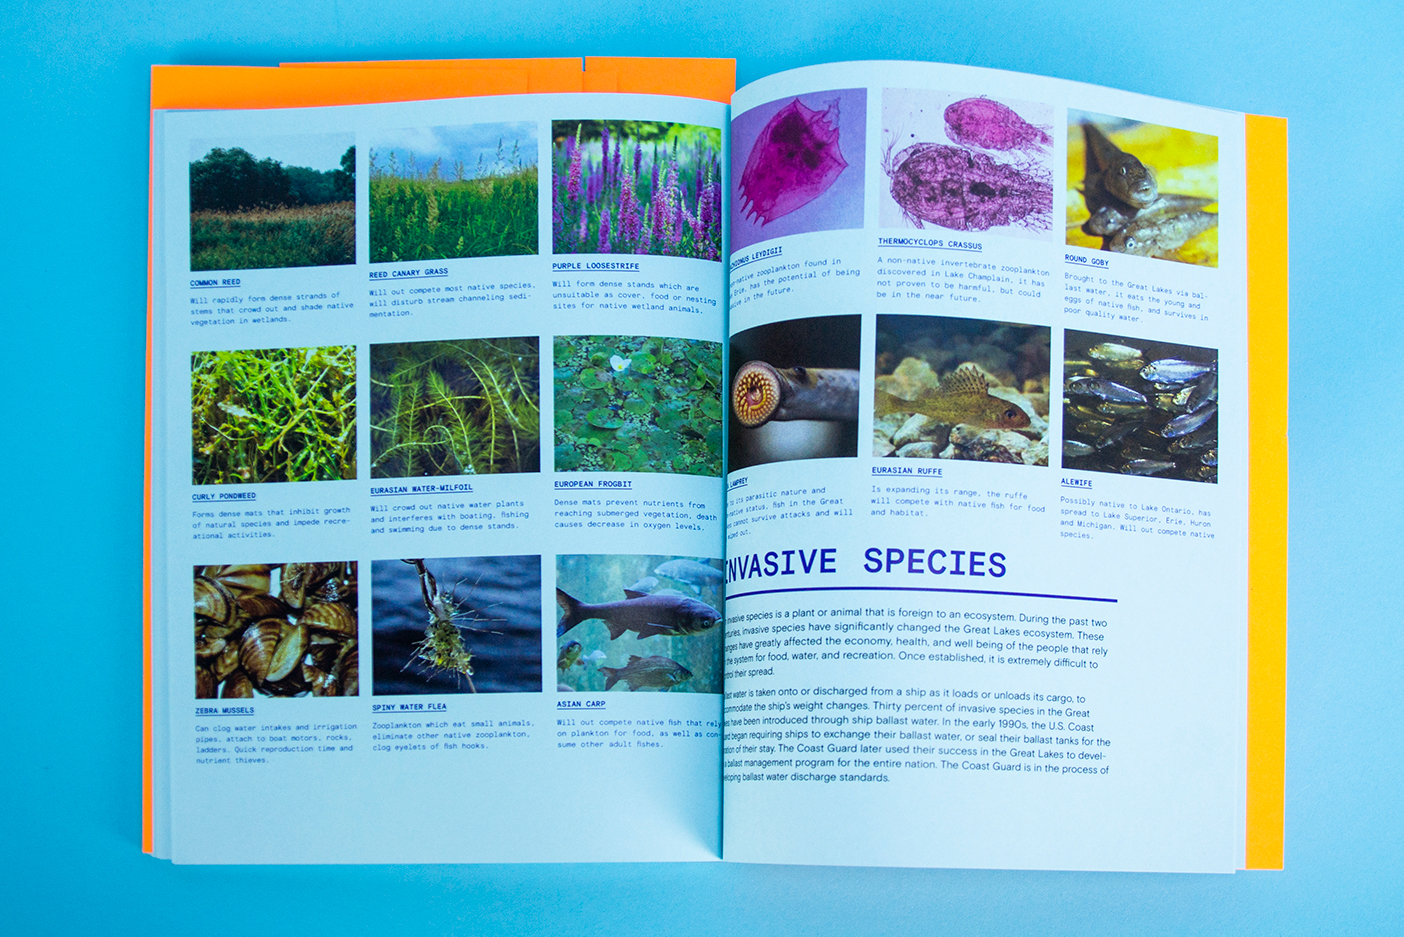 Two page spread, image grid of invasive species